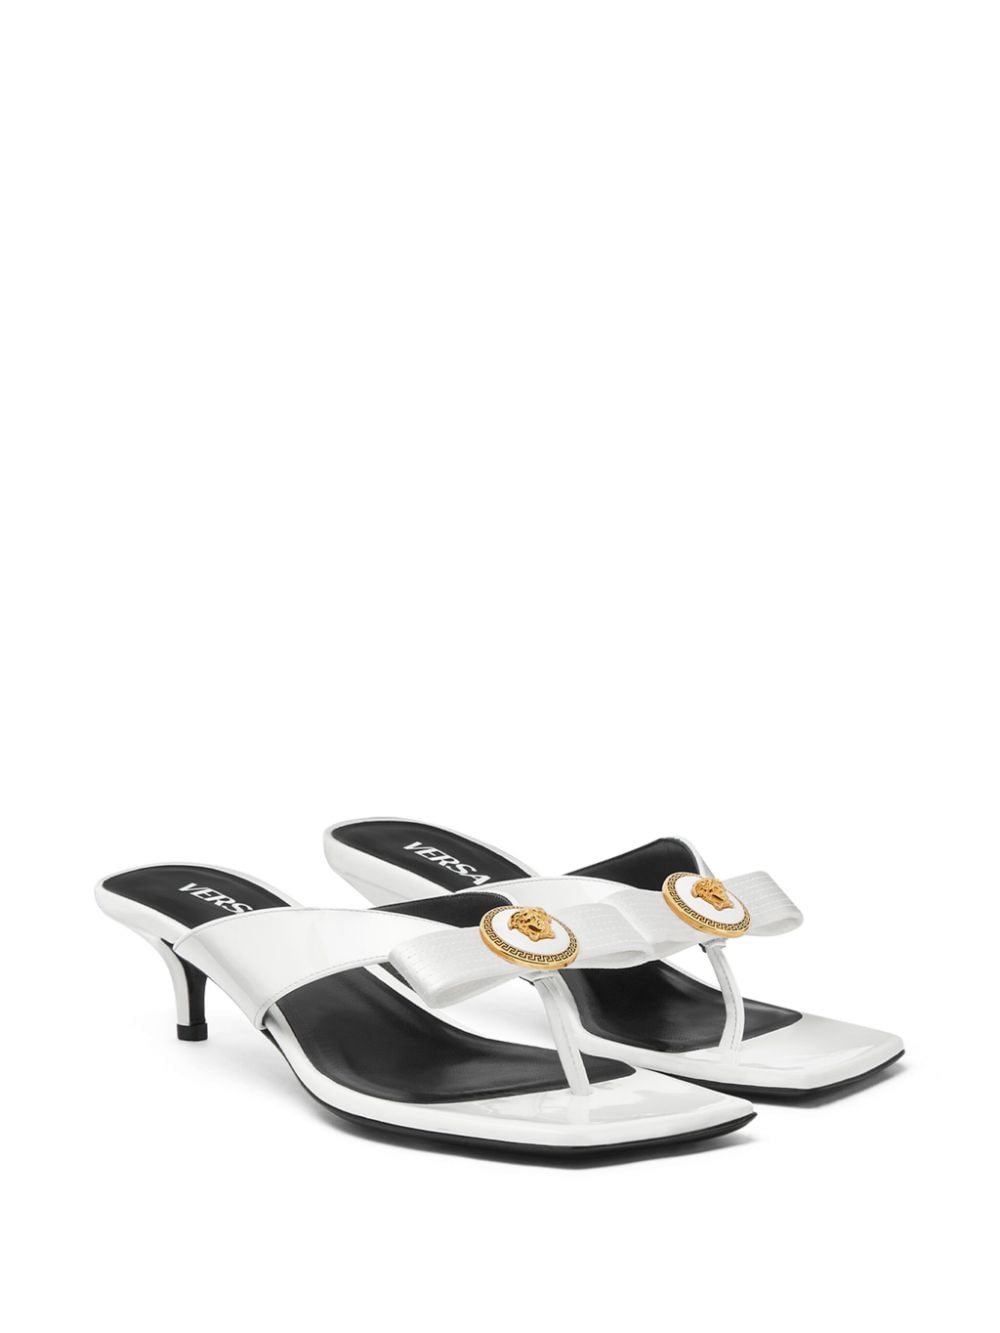 Gianni 45mm leather sandals<BR/><BR/><BR/>